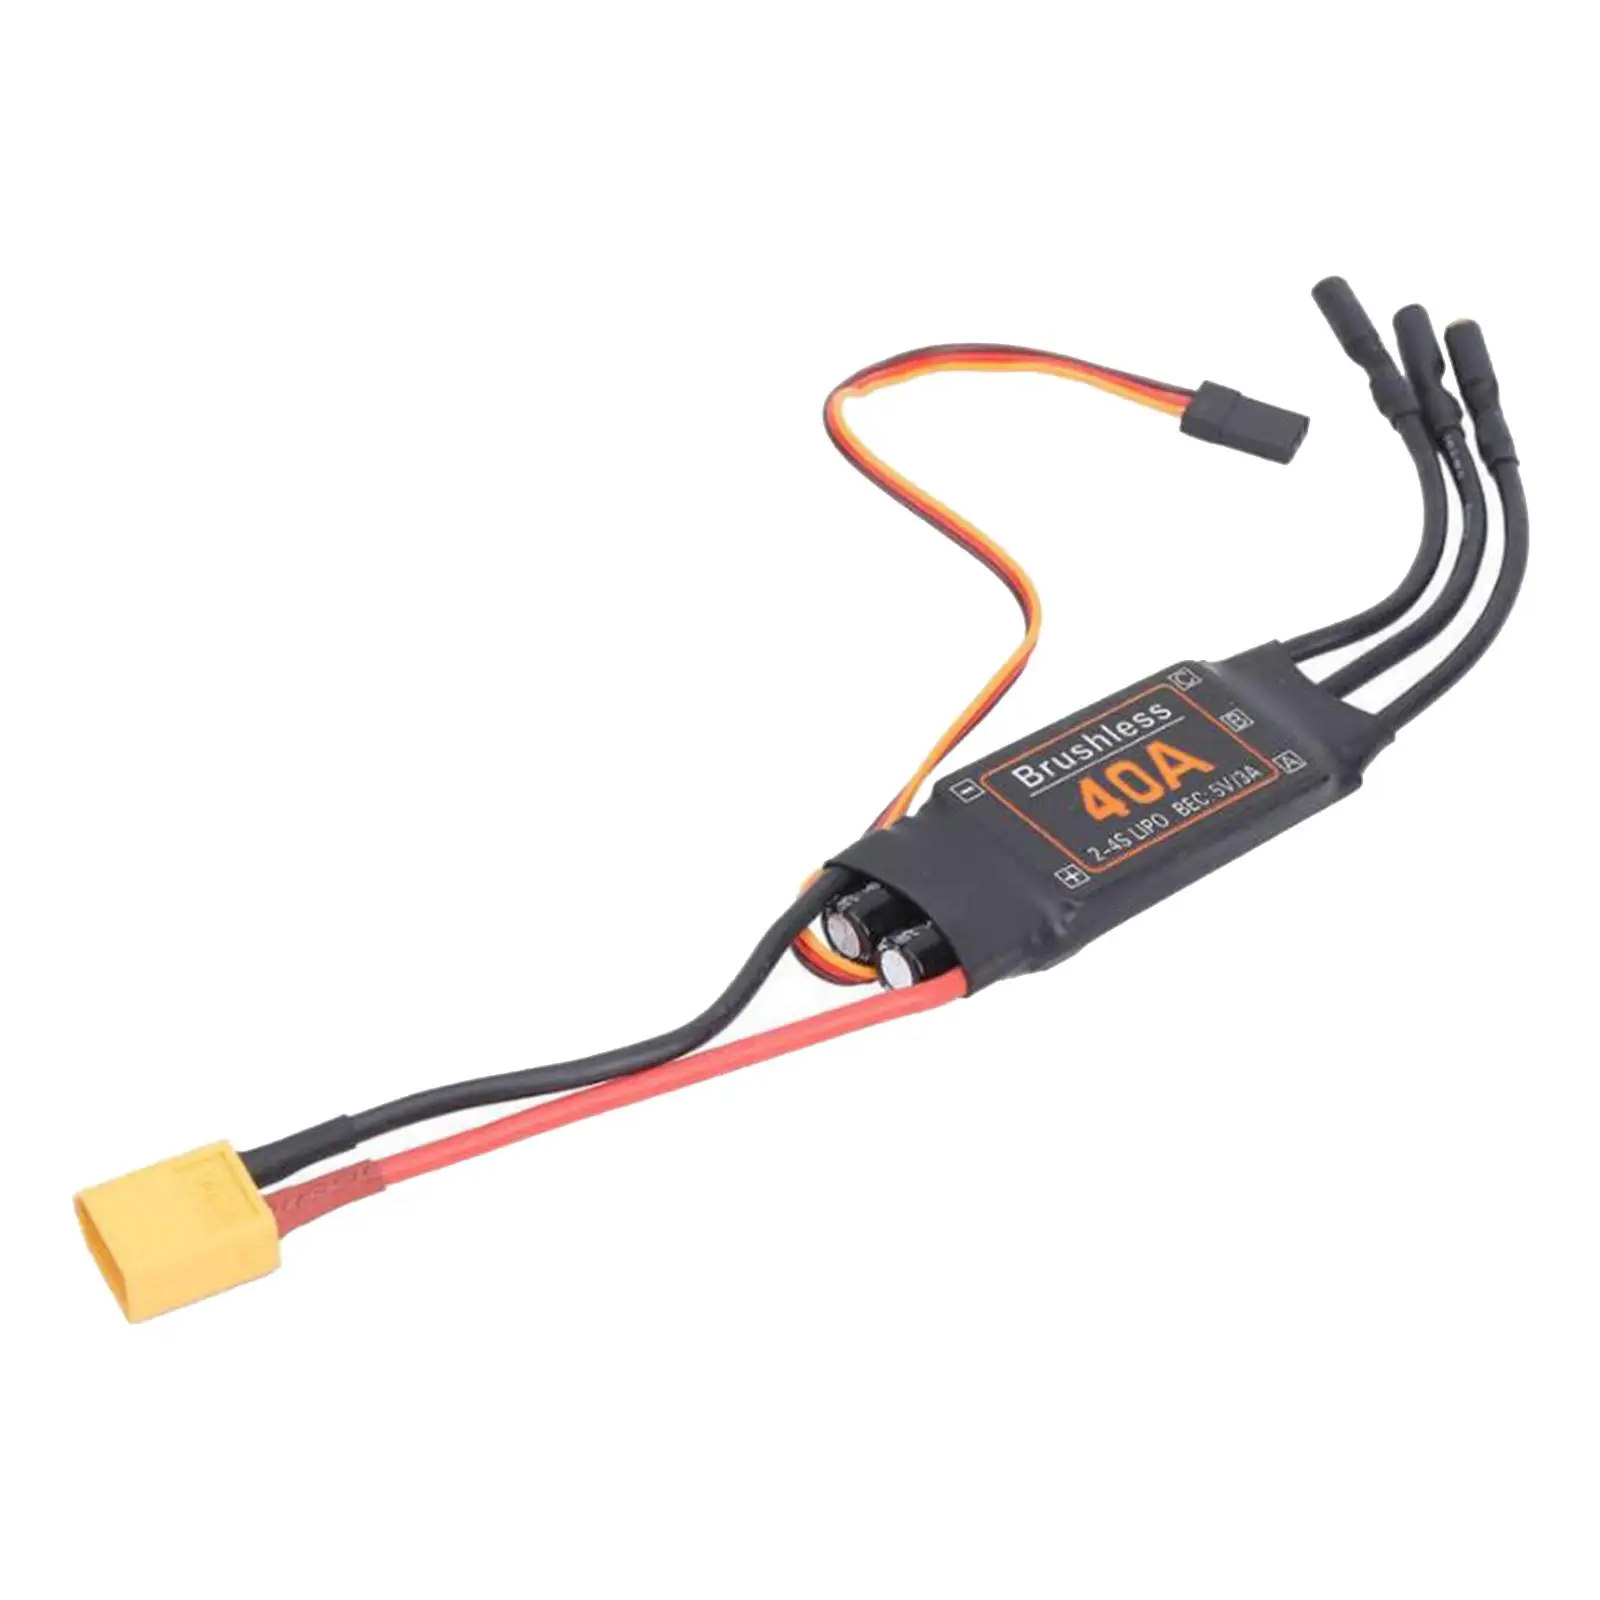 RC ESC XT60 Plug Low Battery Protection Accessories Upgrade Parts Replaces for RC Helicopter Accs Replaces images - 3